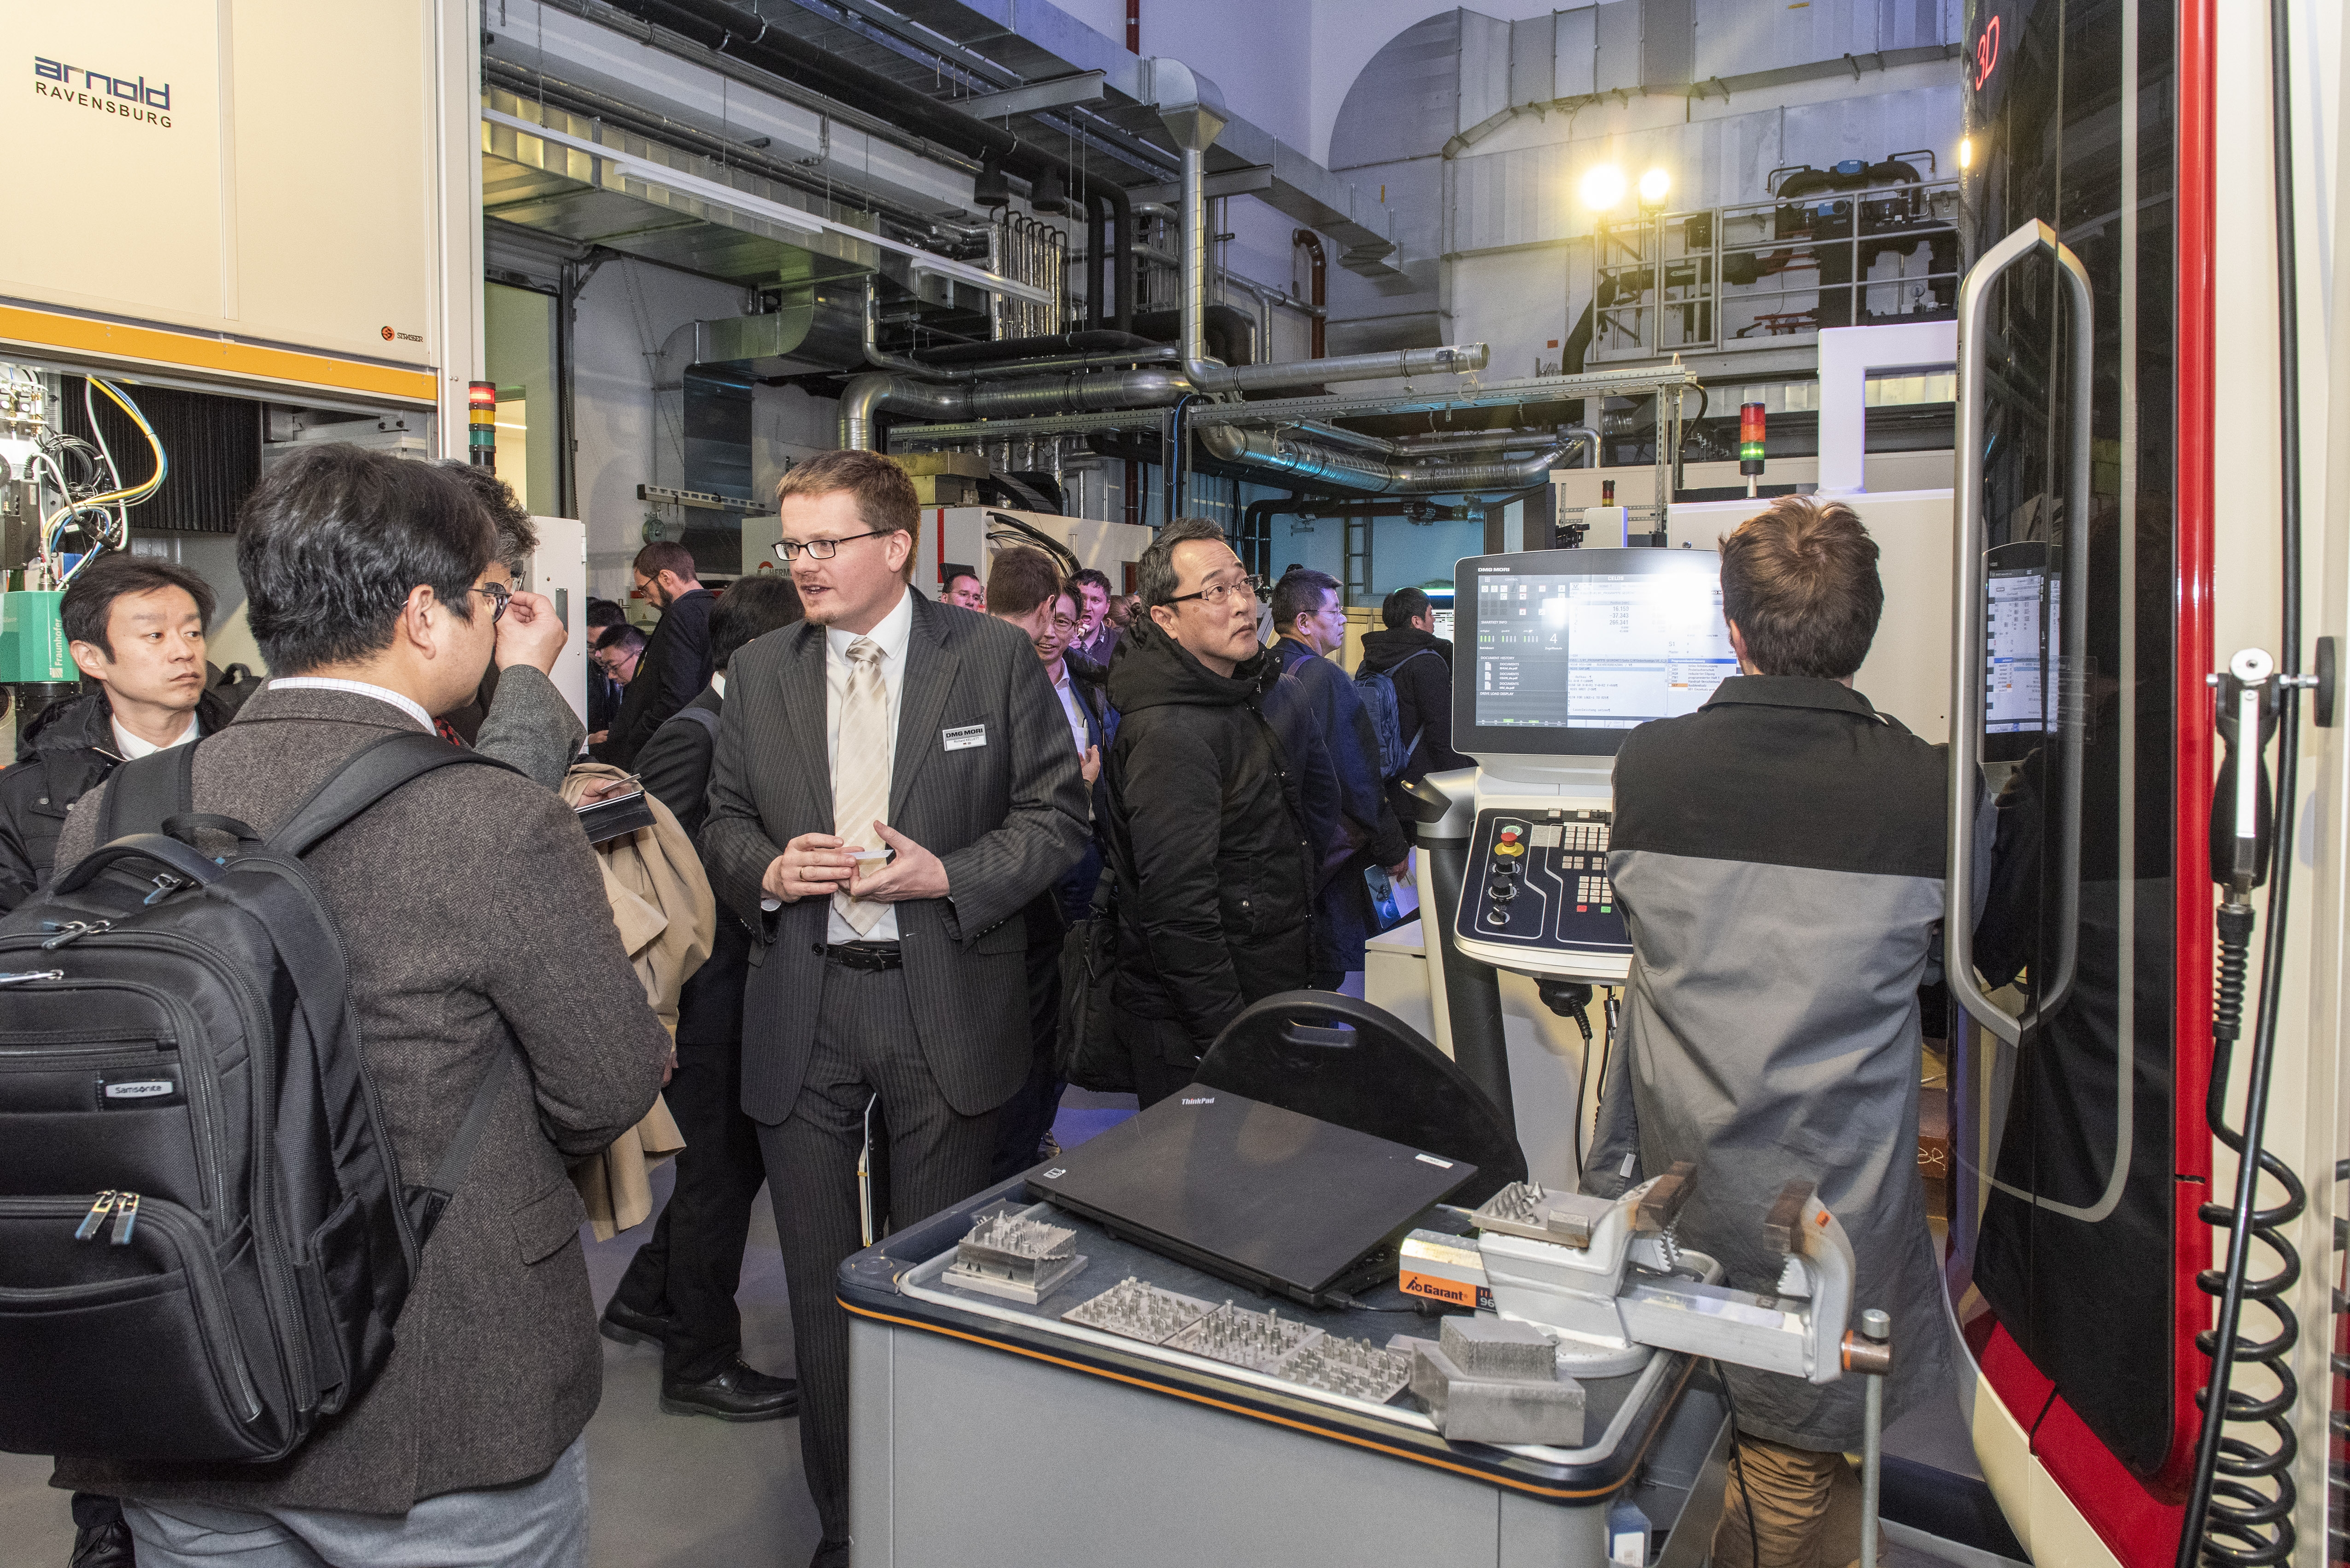 On the eve of the combined conference, Fraunhofer IWS will open its doors for the “Open Lab @Fraunhofer IWS”.